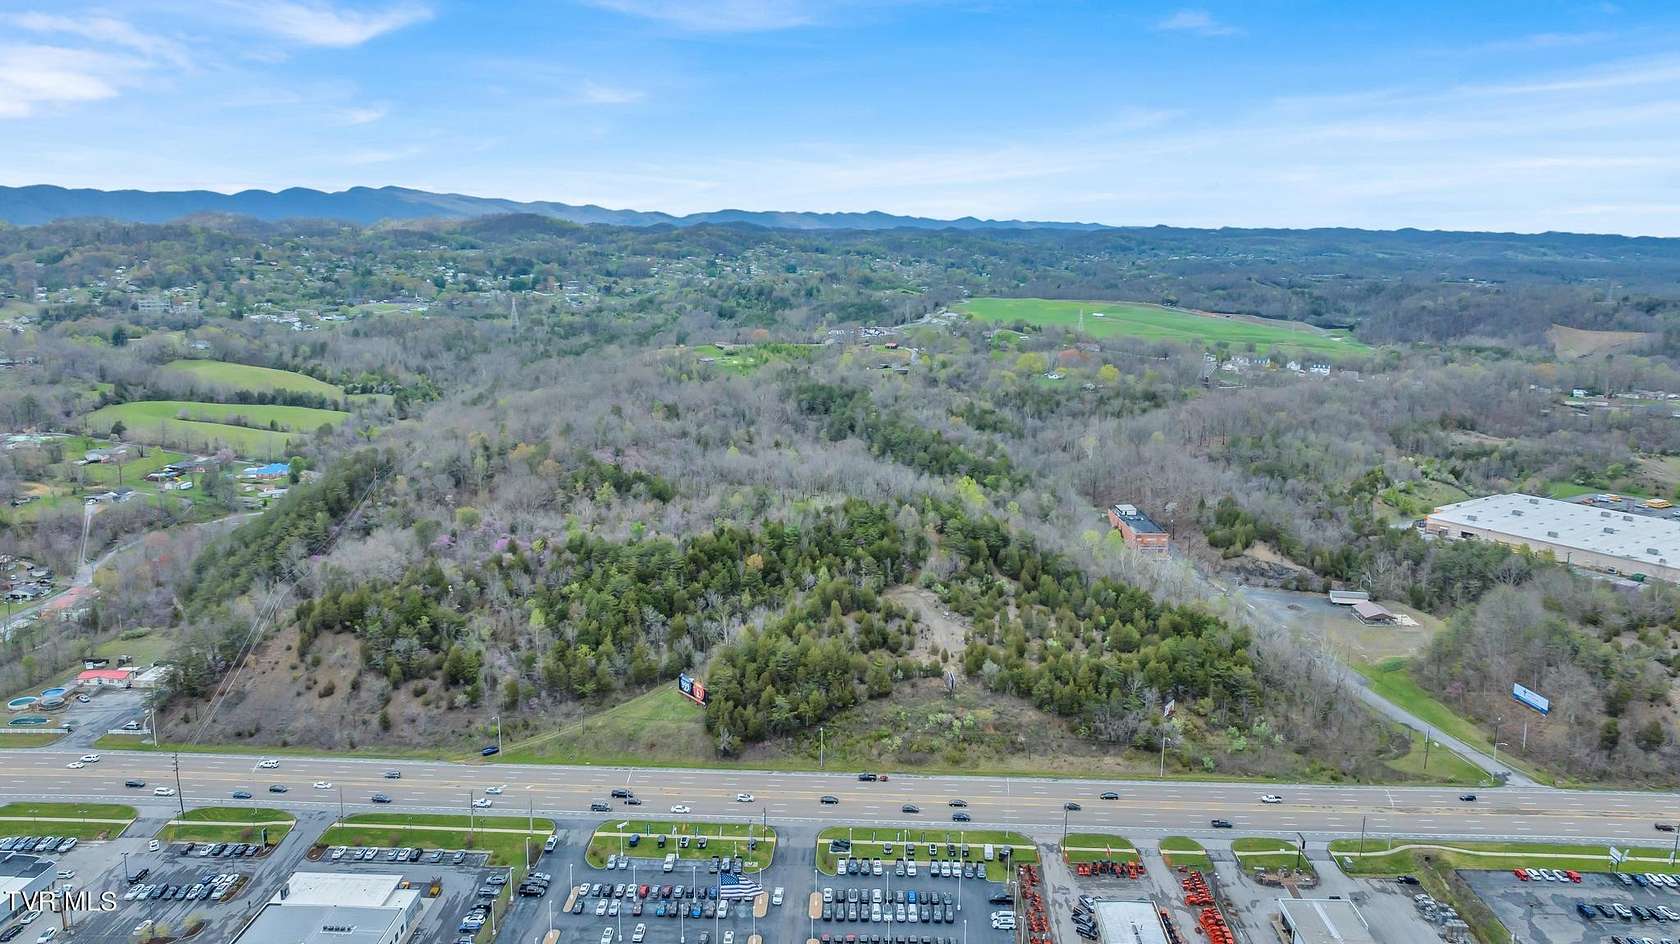 48 Acres of Mixed-Use Land for Sale in Kingsport, Tennessee